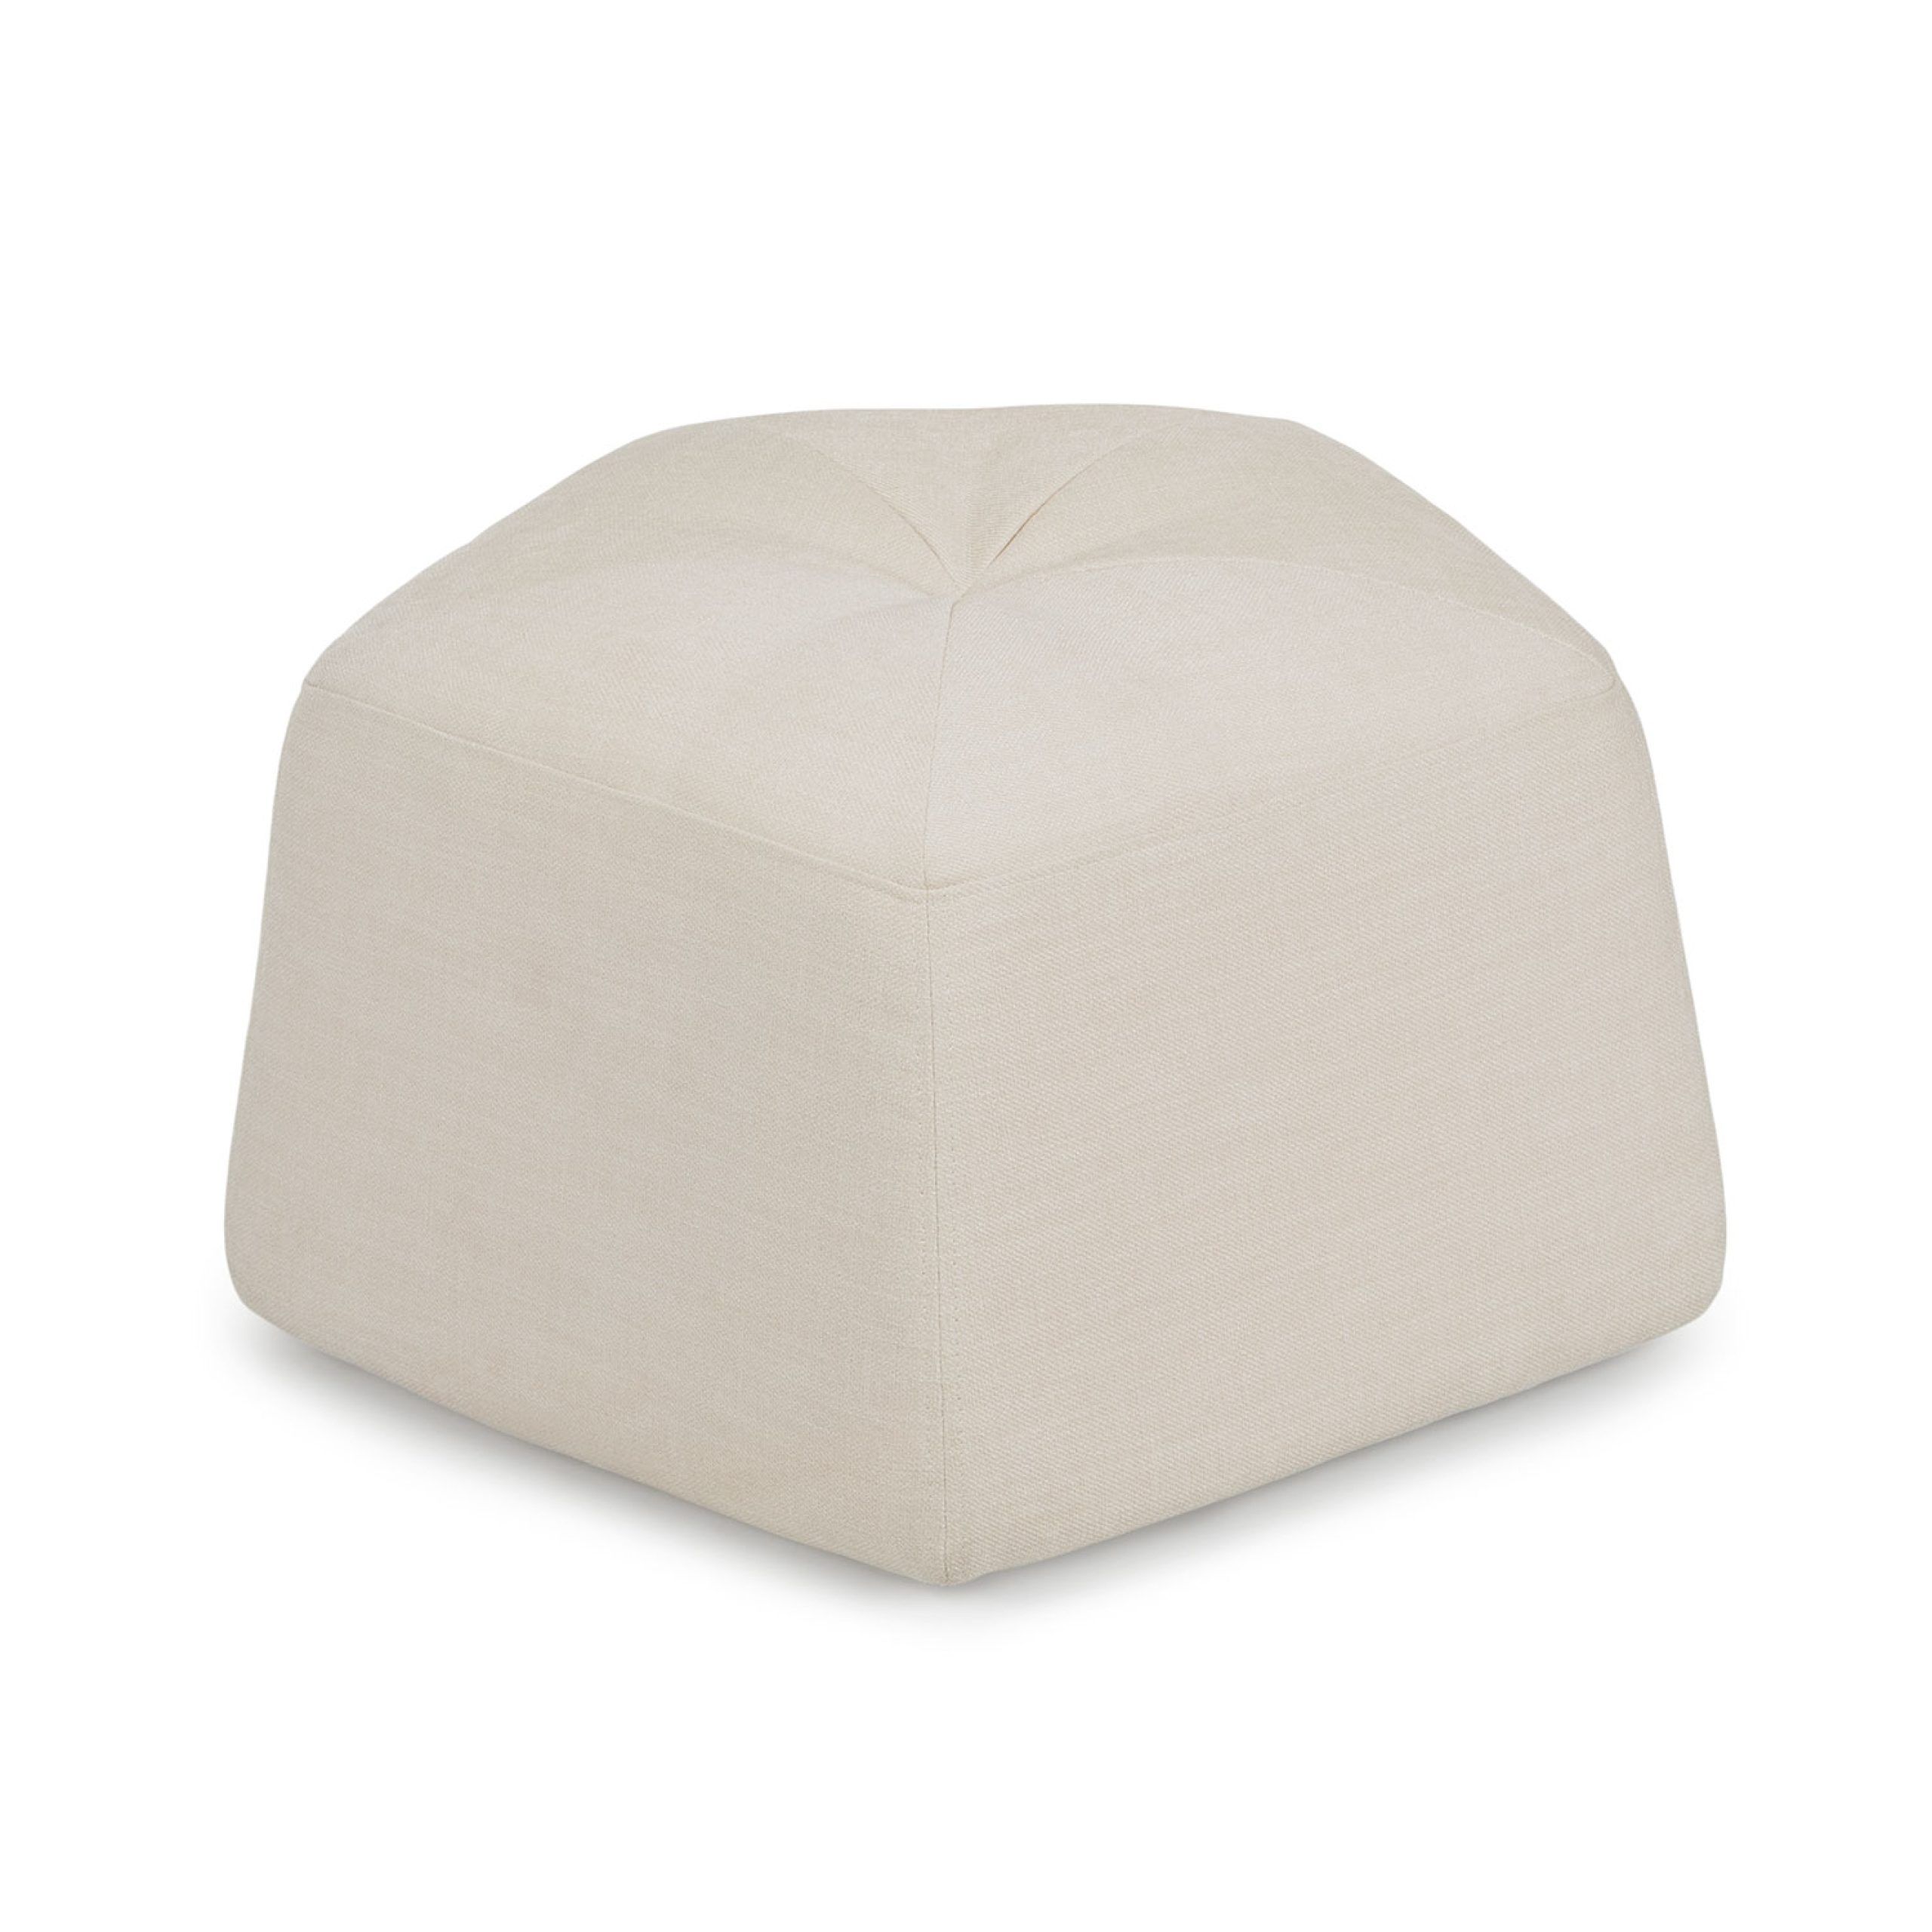 Article Throughout Soft Ivory Geometric Ottomans (View 4 of 10)